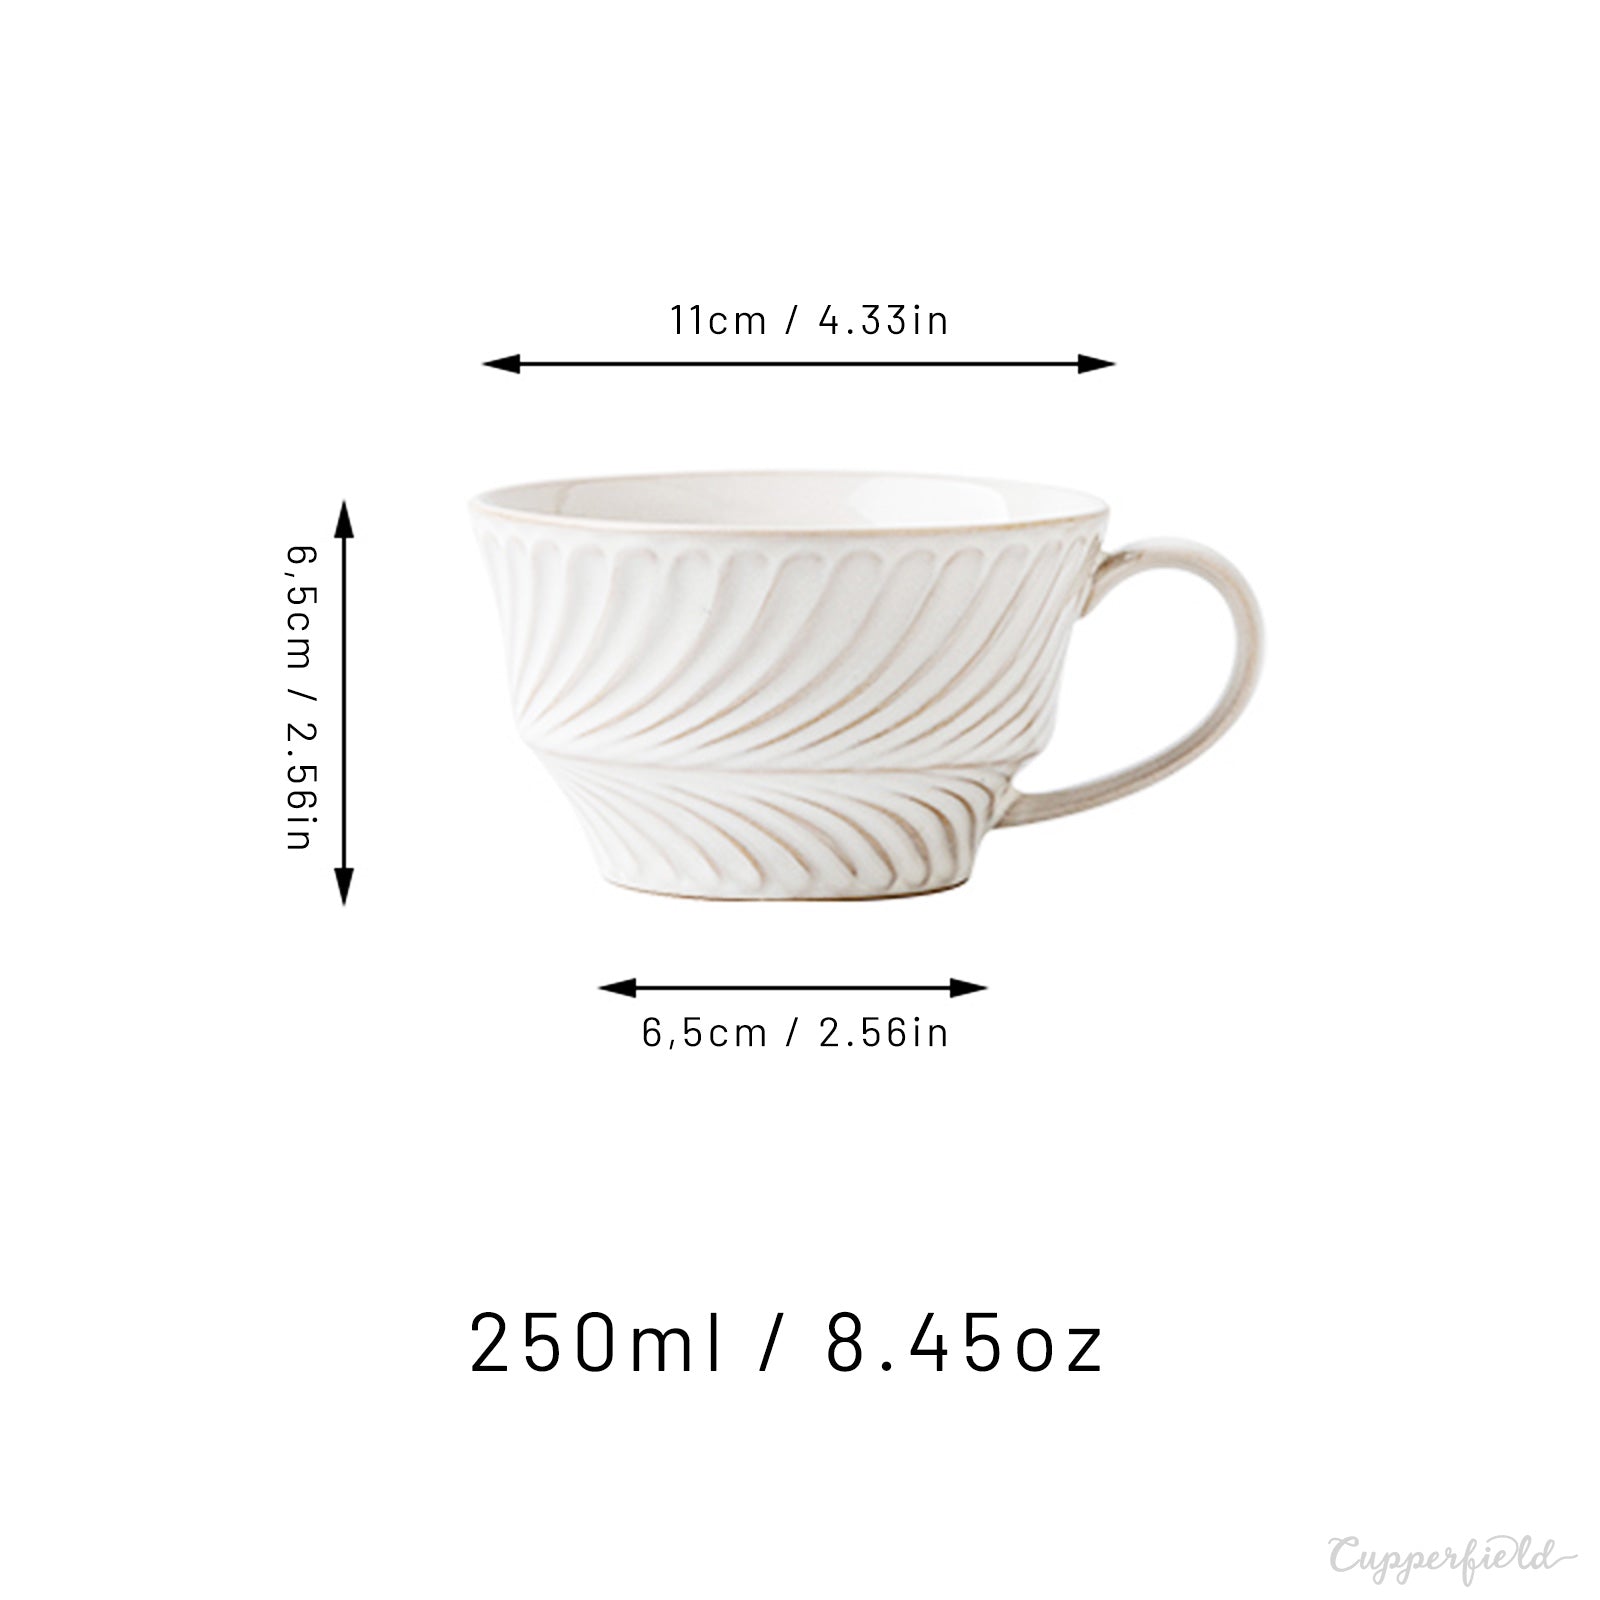 Elegant White and Cream Swirl-Pattern Coffee Cup with Matching Saucer